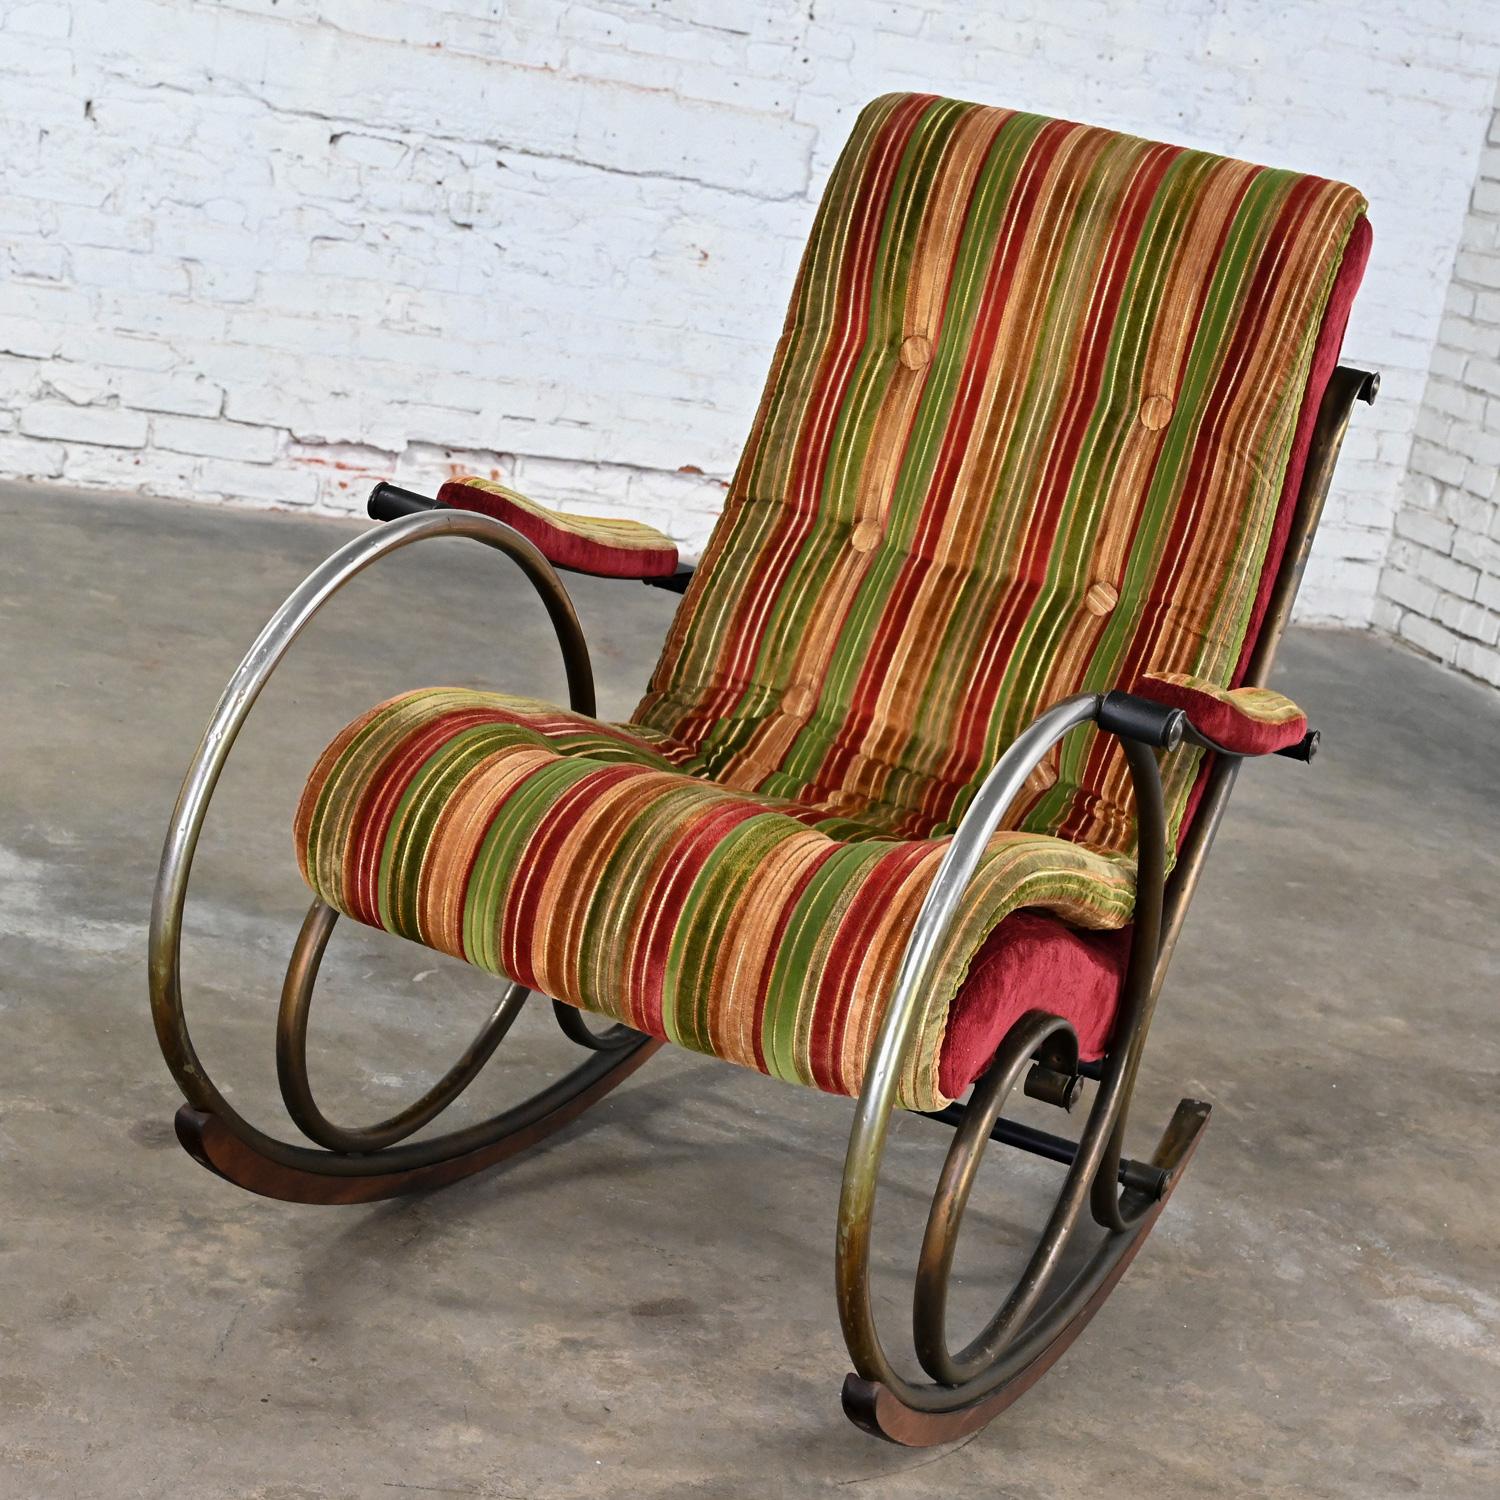 Marvelous vintage Neoclassic rocking chair by Lee Woodard comprised of a metal frame with an antiqued bronze finish and purposed hammered look & burgundy, gold, & green striped velvet chenille fabric with button detail, black accents, & wood tread